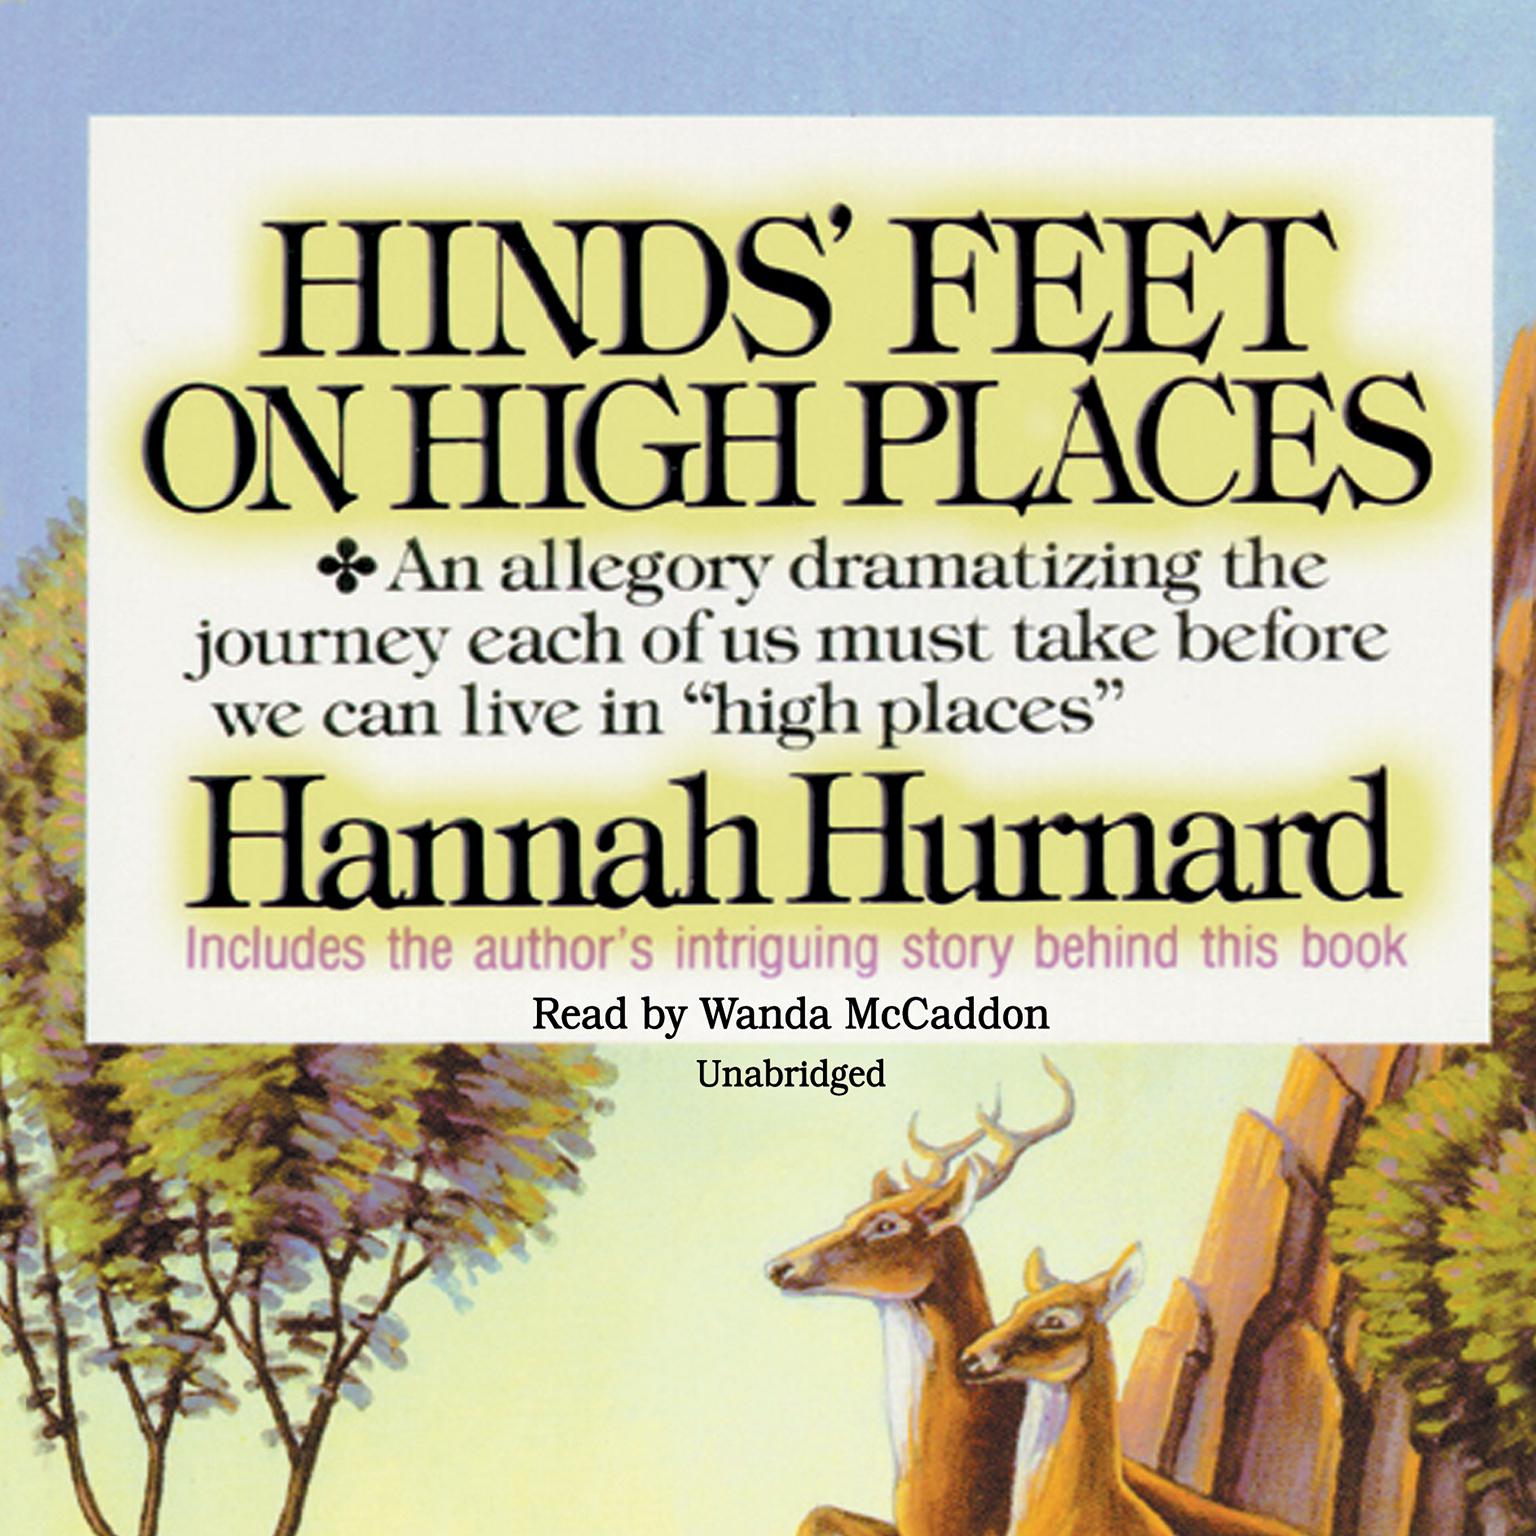 Hinds’ Feet on High Places Audiobook, by Hannah Hurnard